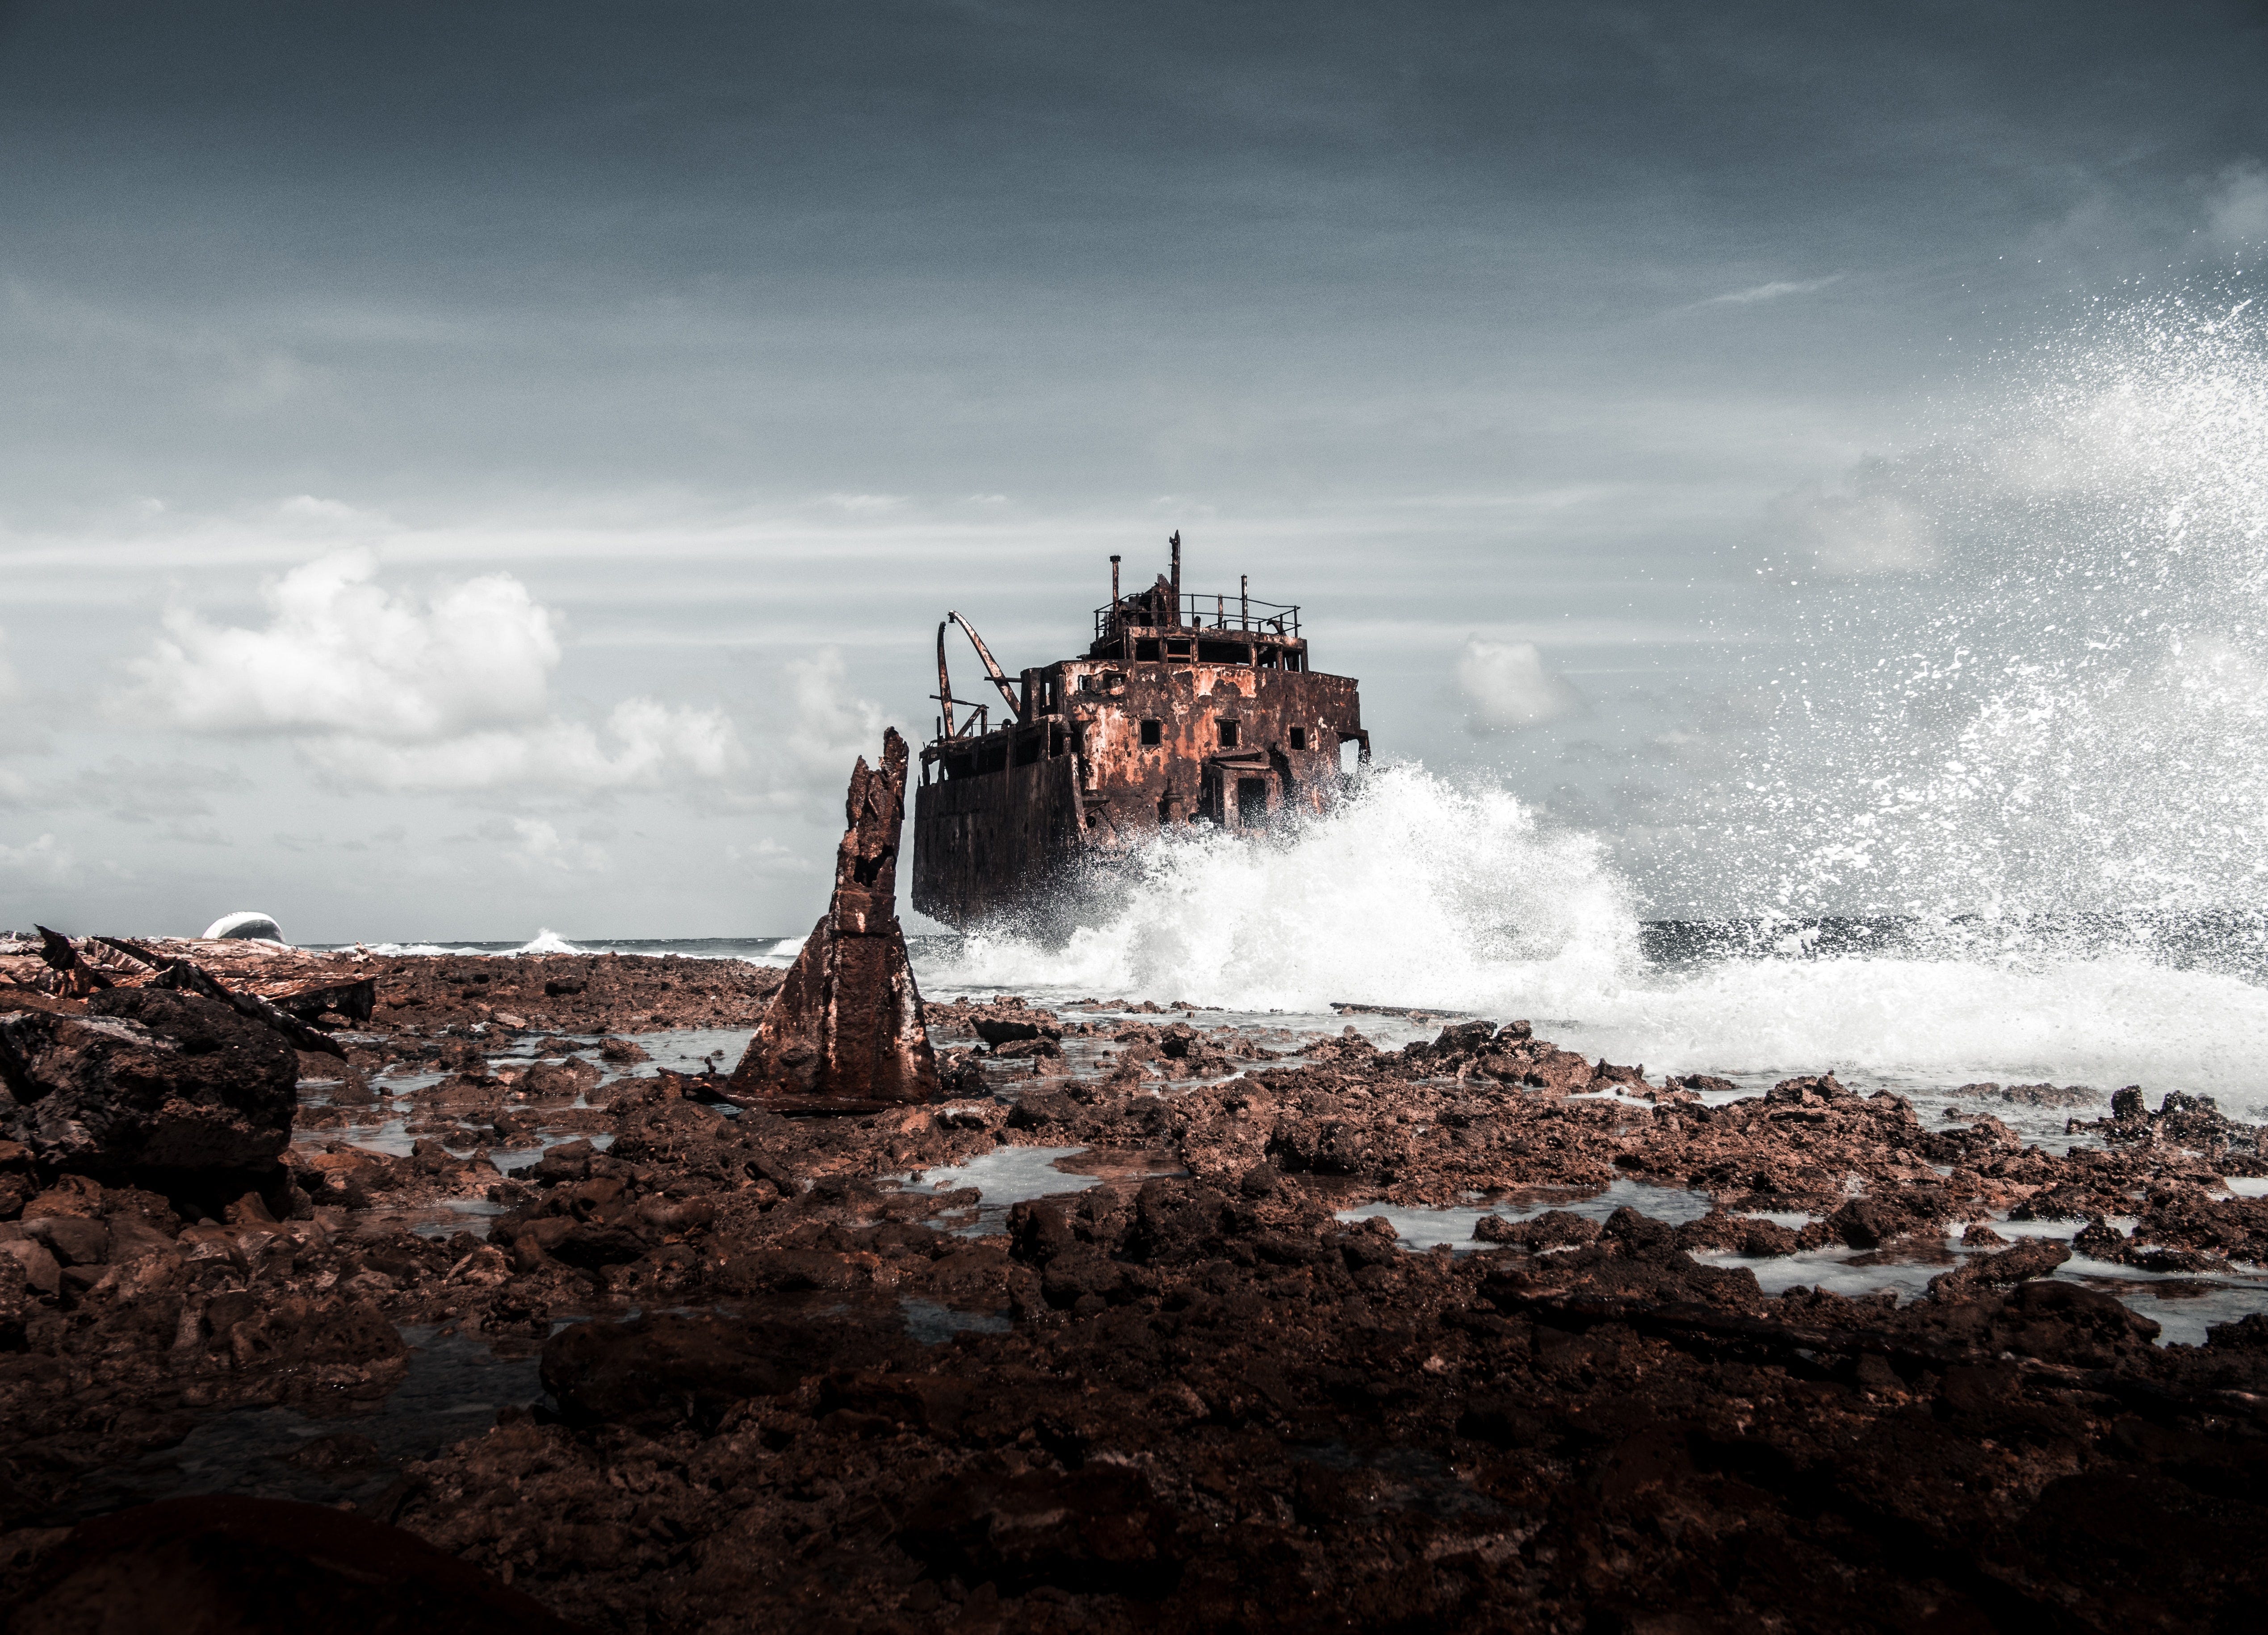 Waves crashing on rock with a derelict building in the background